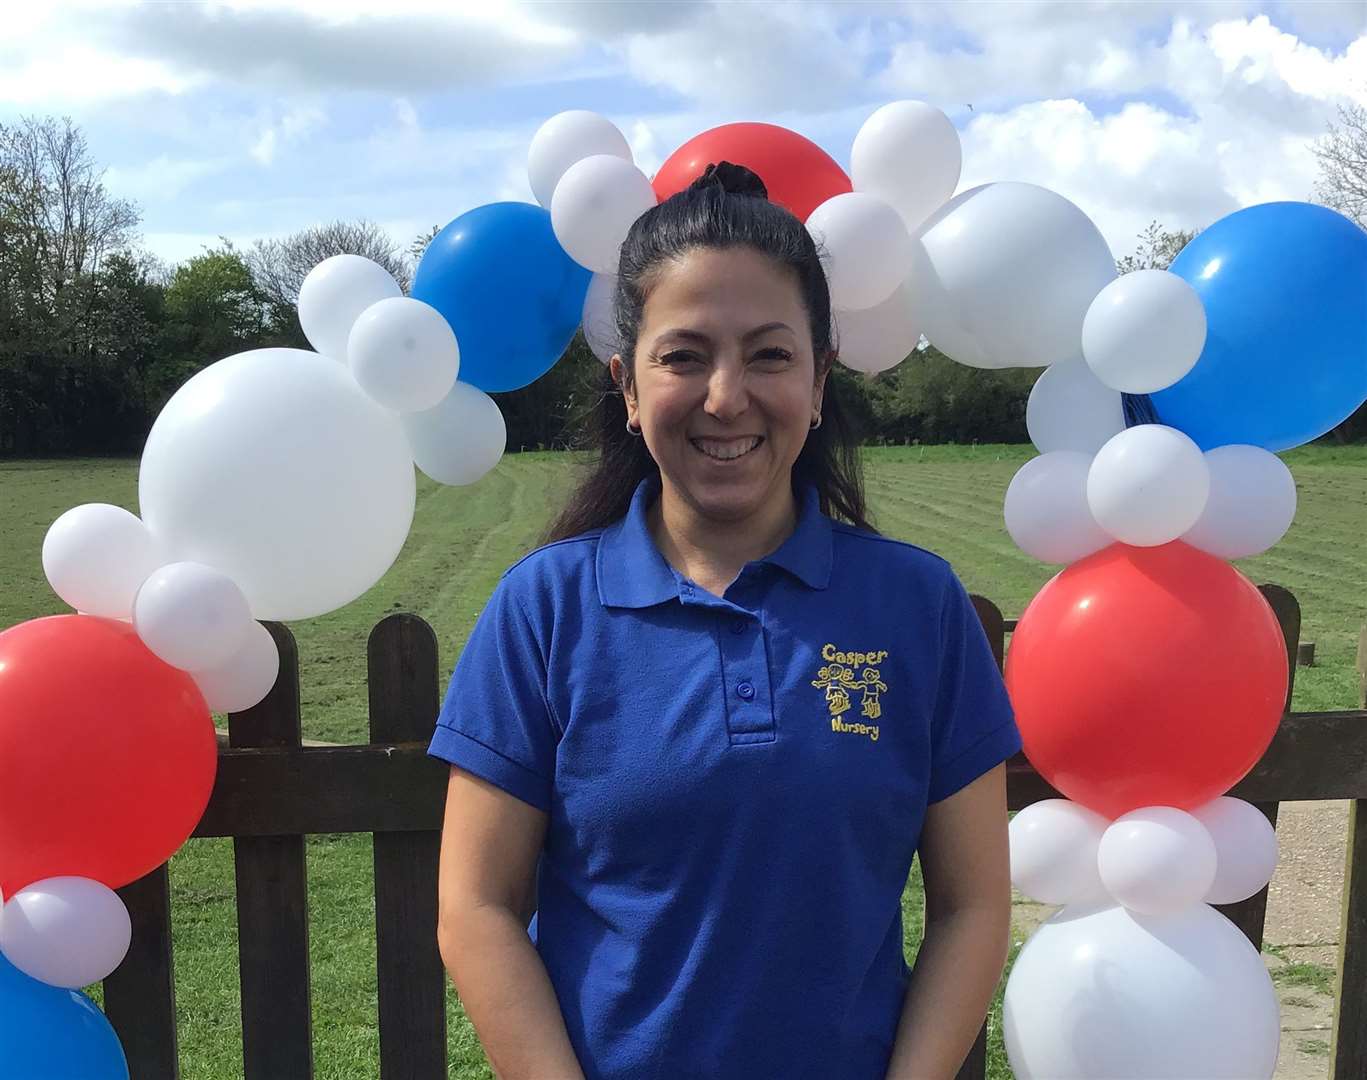 Nursery manager Nikki Pope says she is over the moon with the new rating